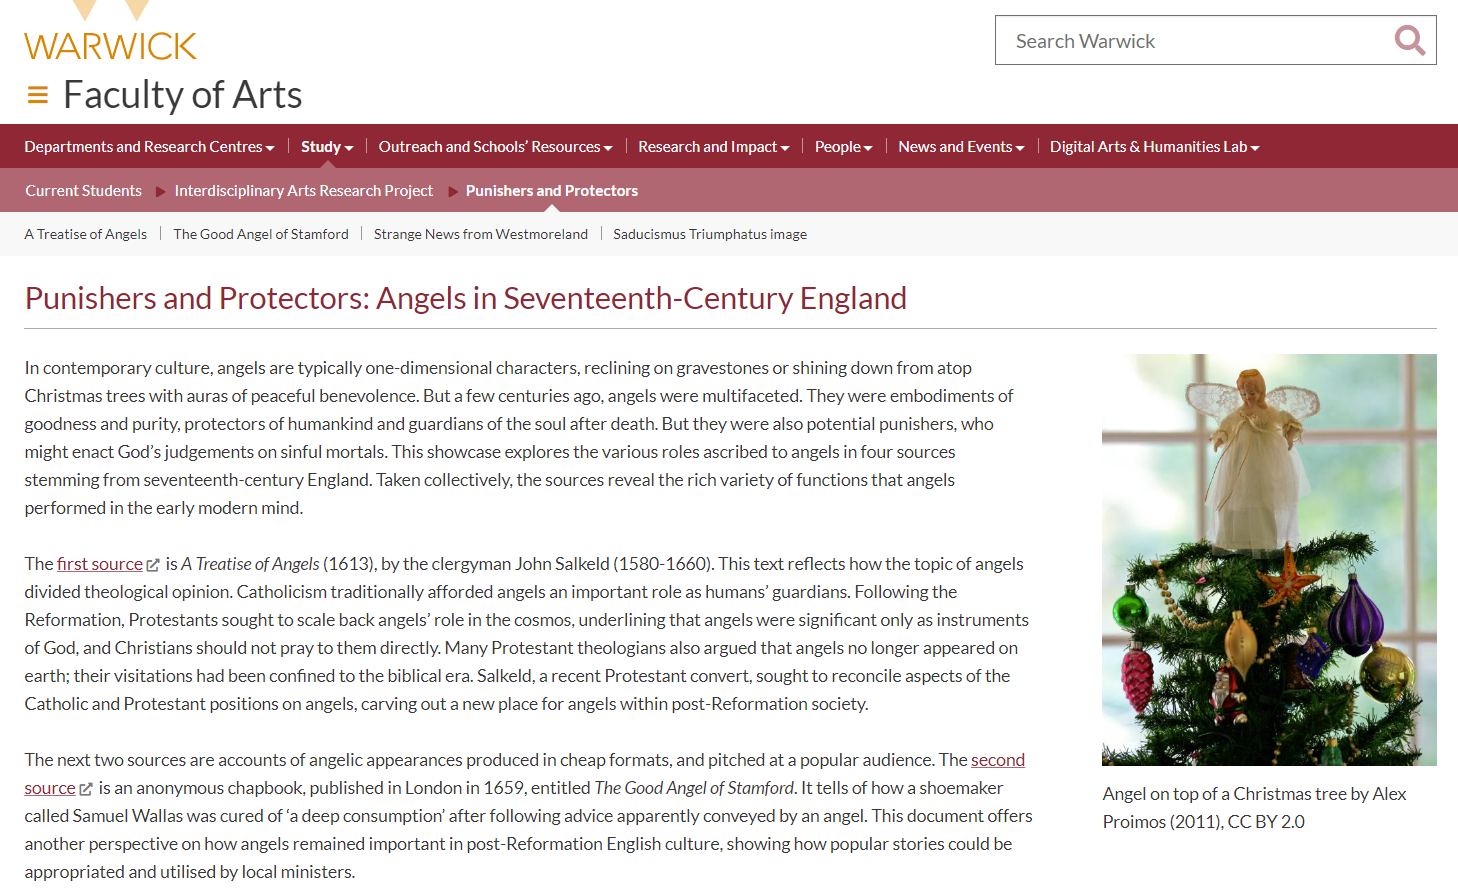 A screenshot of a student's digital showcase, with the title "Punishers and Protectors: Angels in Seventeenth Century England"